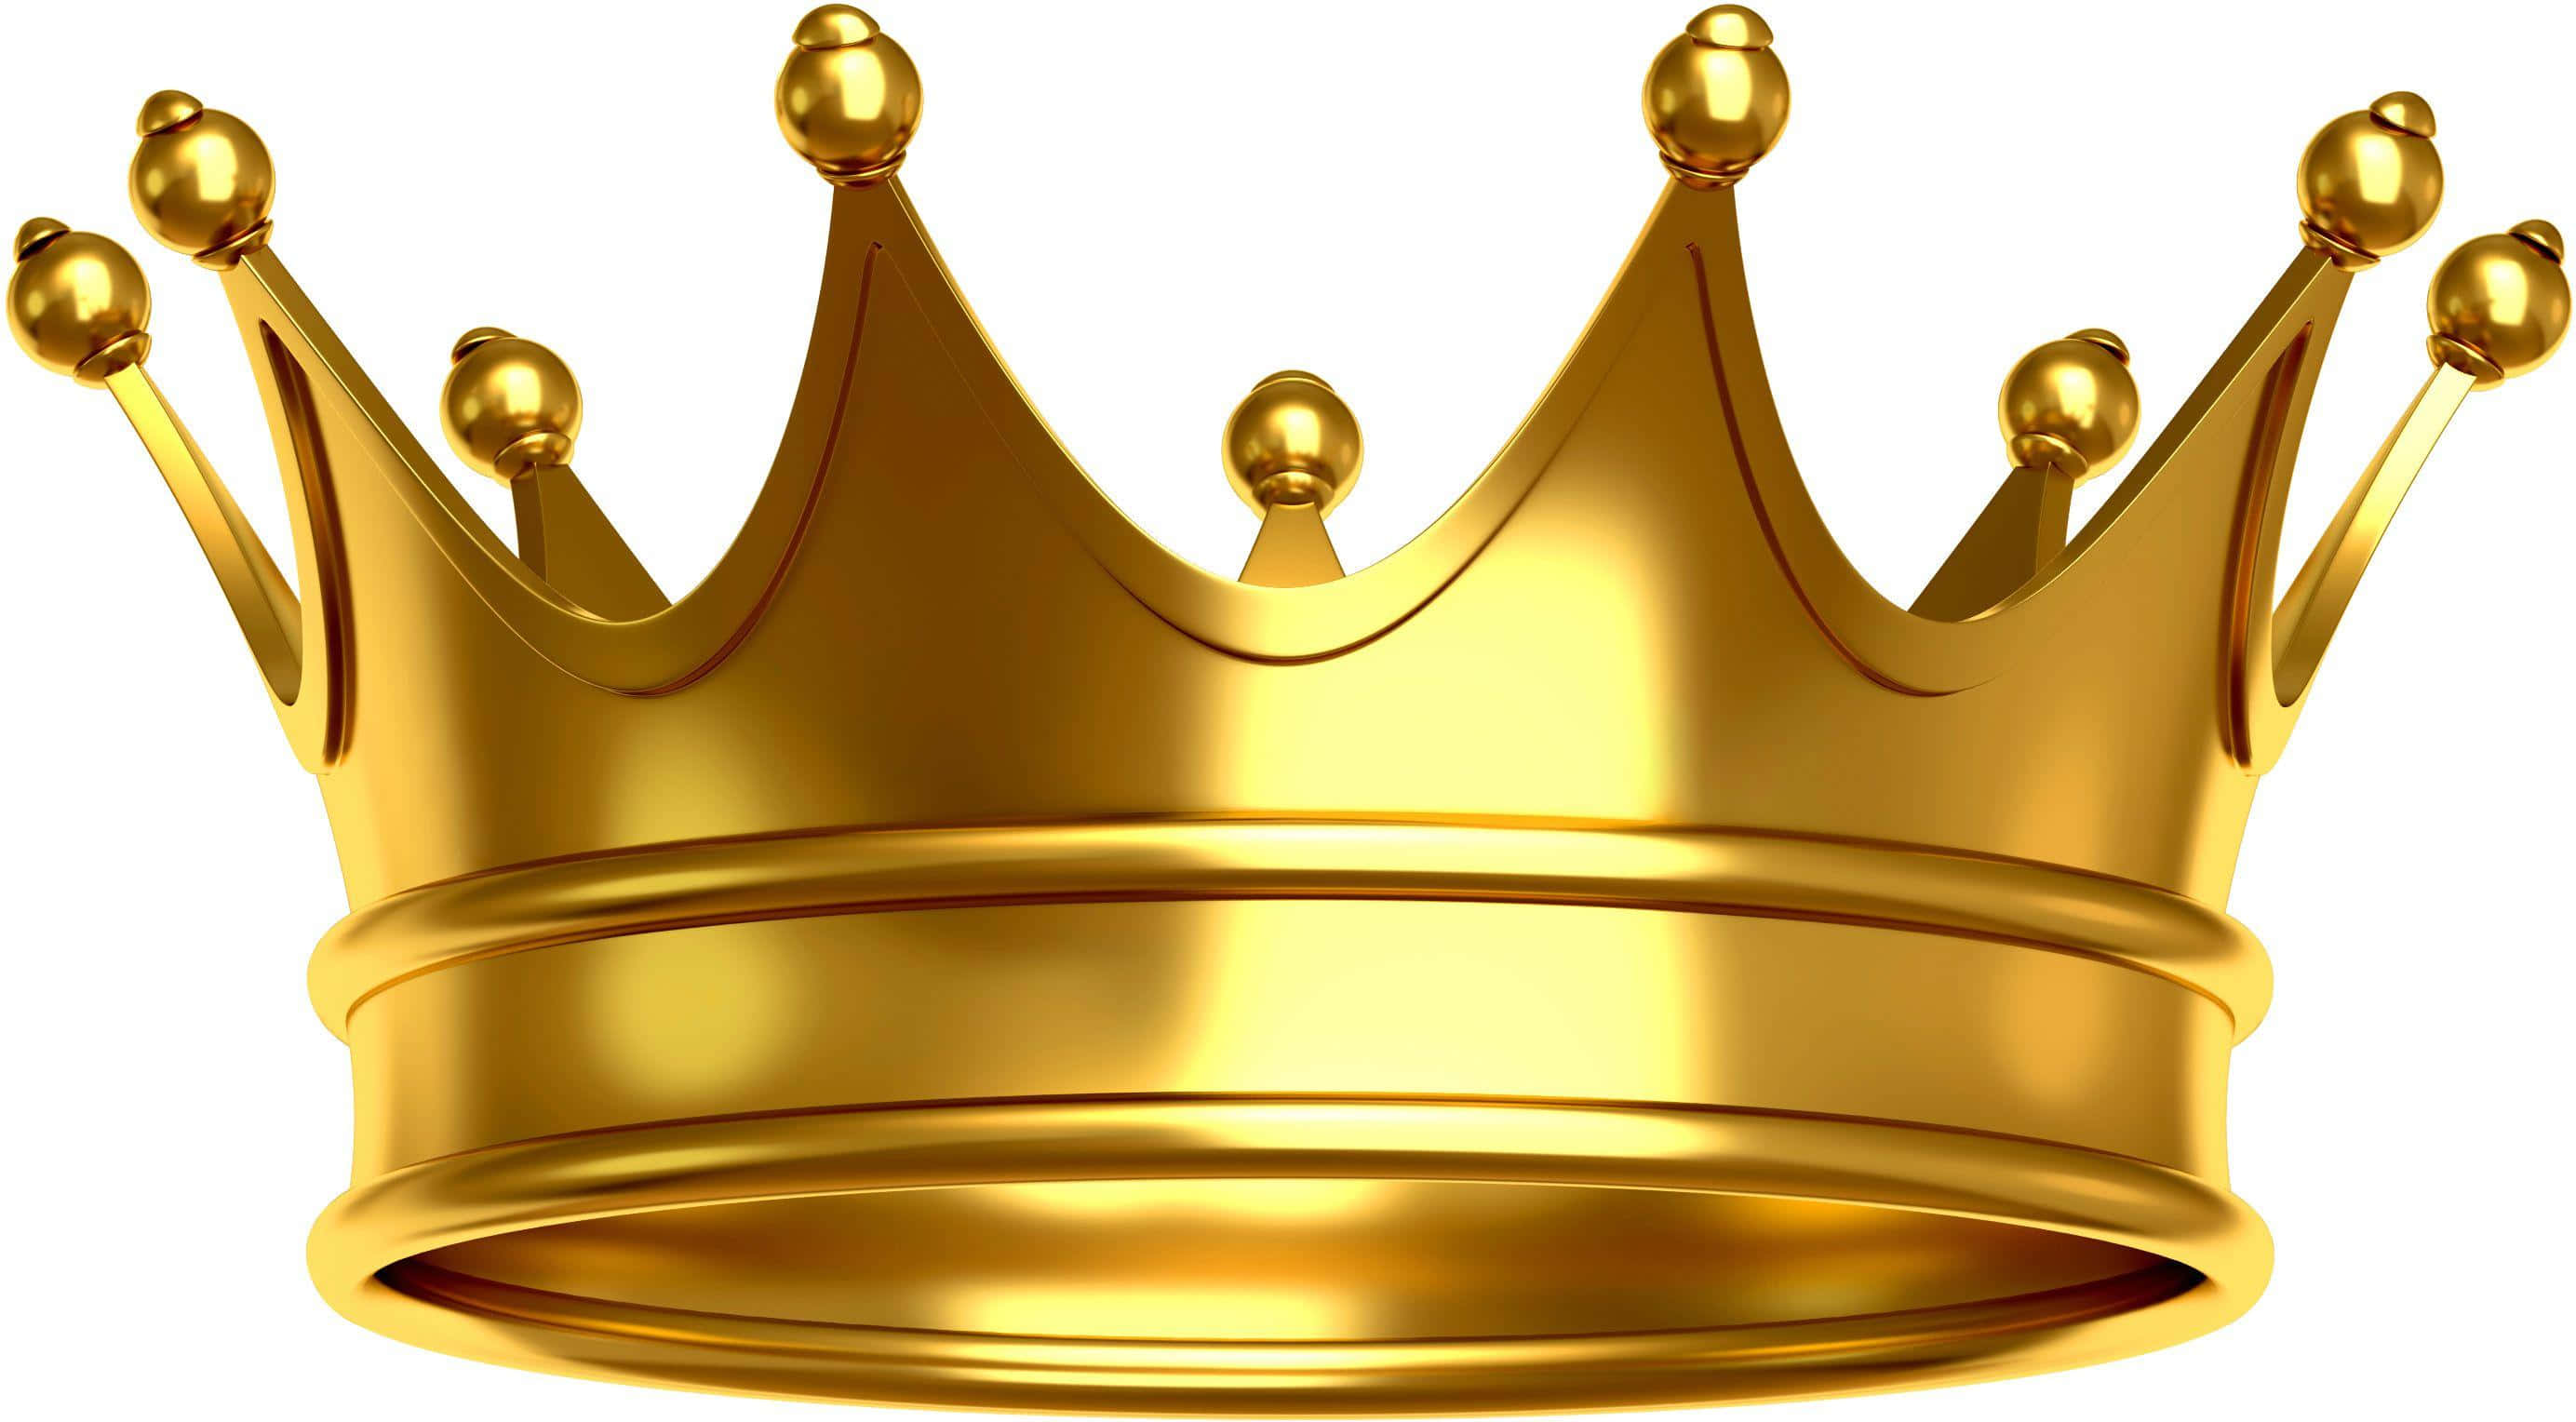 A Golden Crown On A White Background